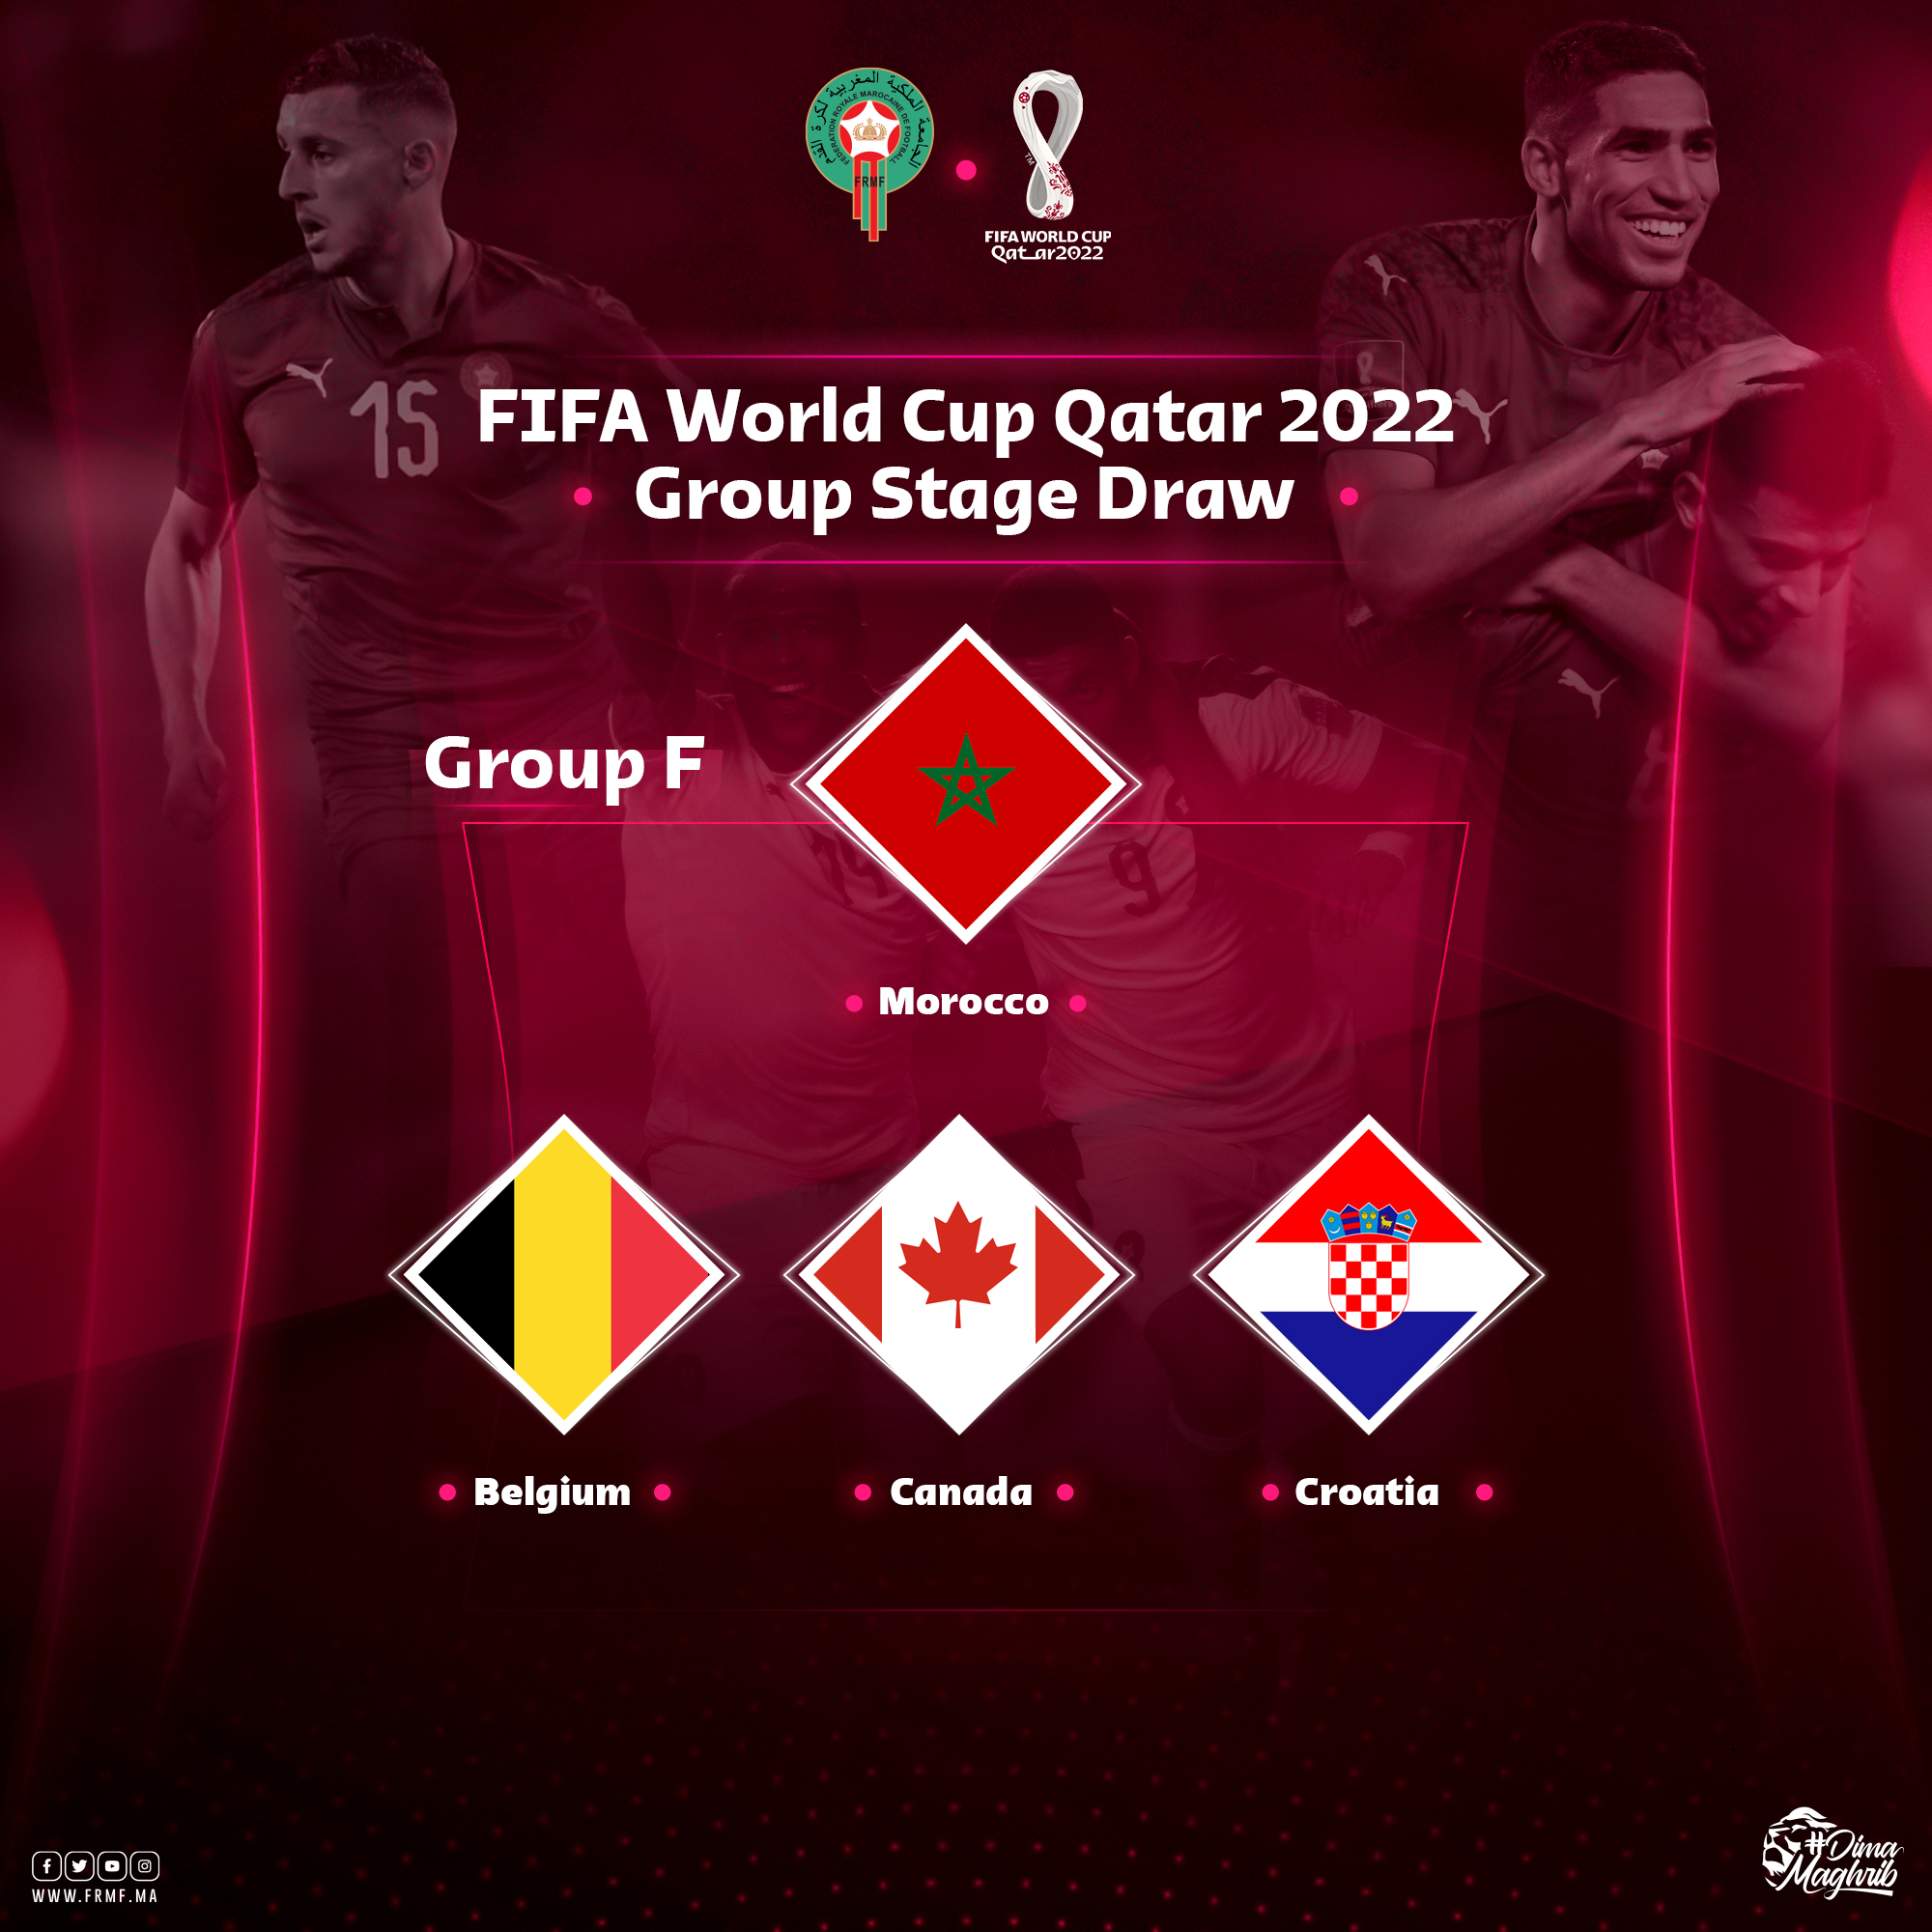 live streaming of fifa club world cup